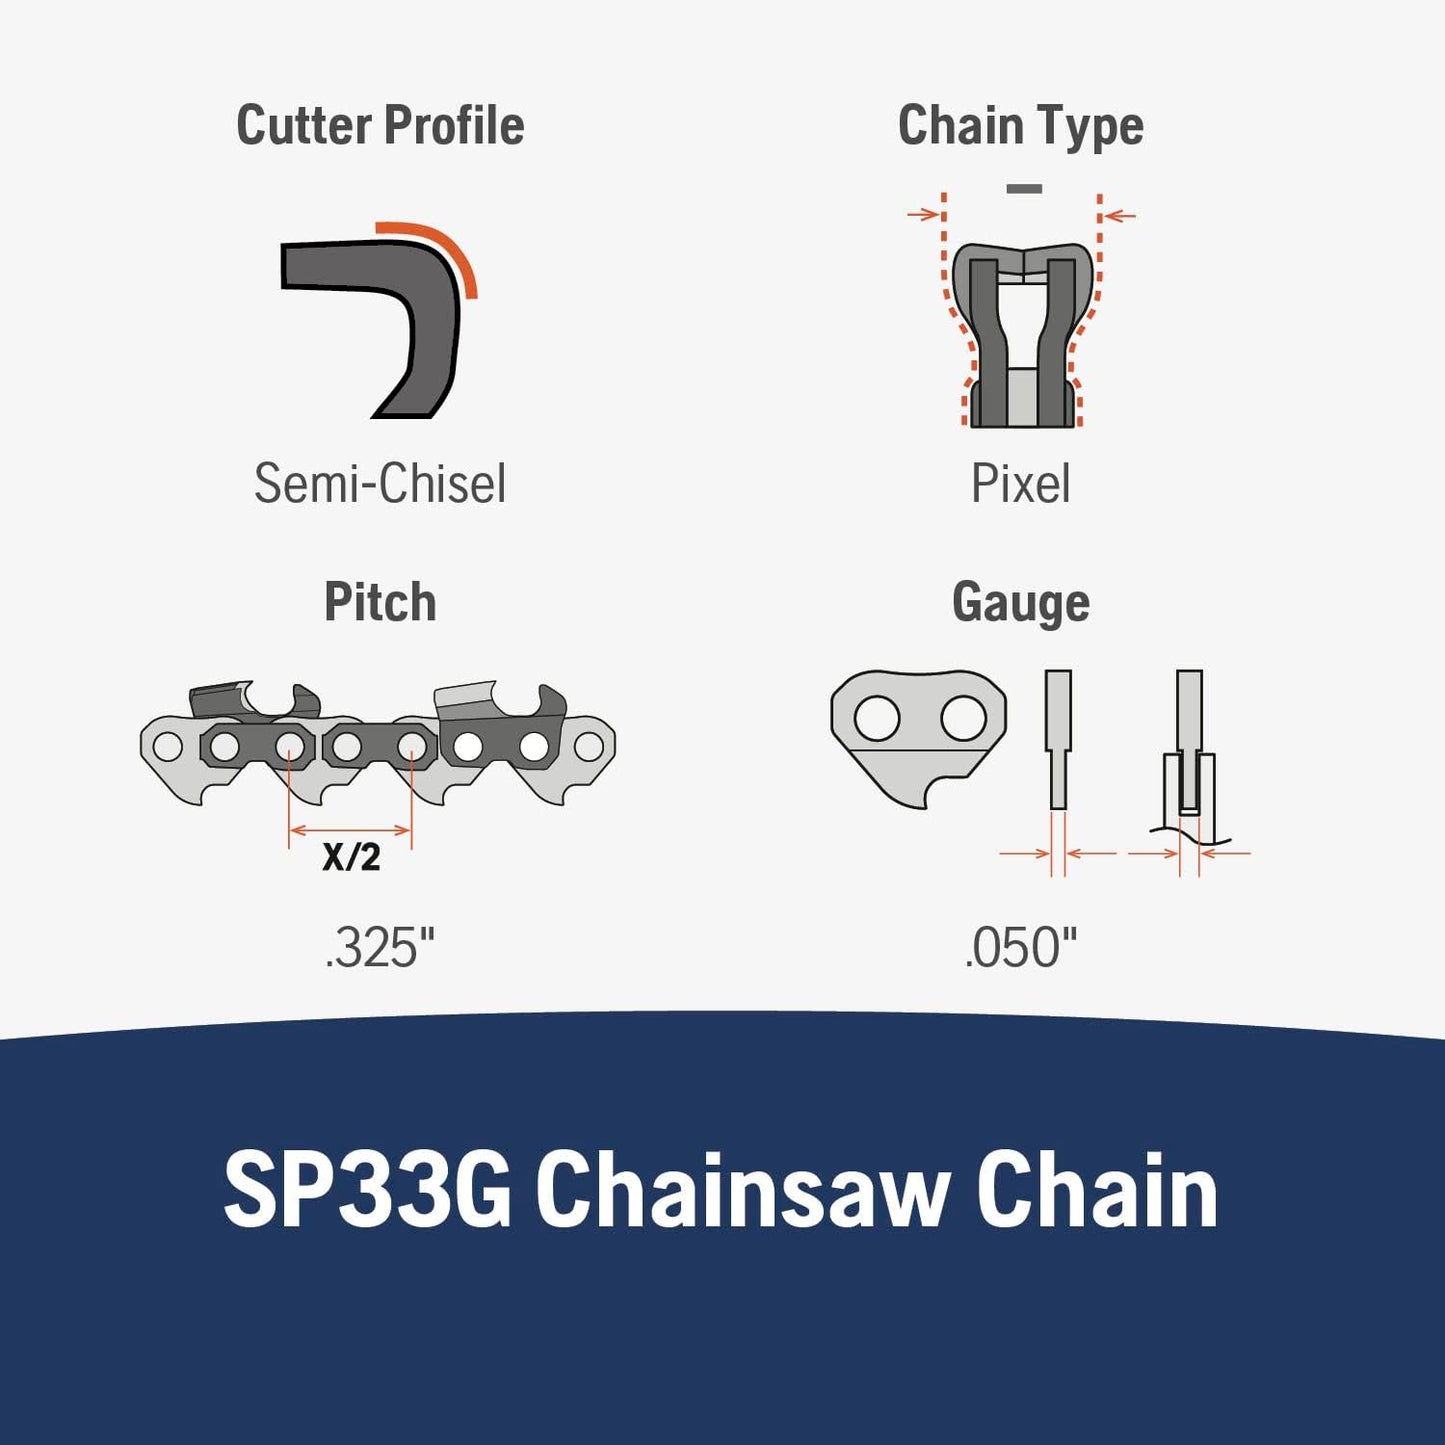 Husqvarna X-Cut SP33G 20 Inch Chainsaw Chain, .325" Pitch, .050" Gauge, 78 Drive Links, Pre-Stretched Chainsaw Blade Replacement with Superior Lubrication and Low Kickback, Gray